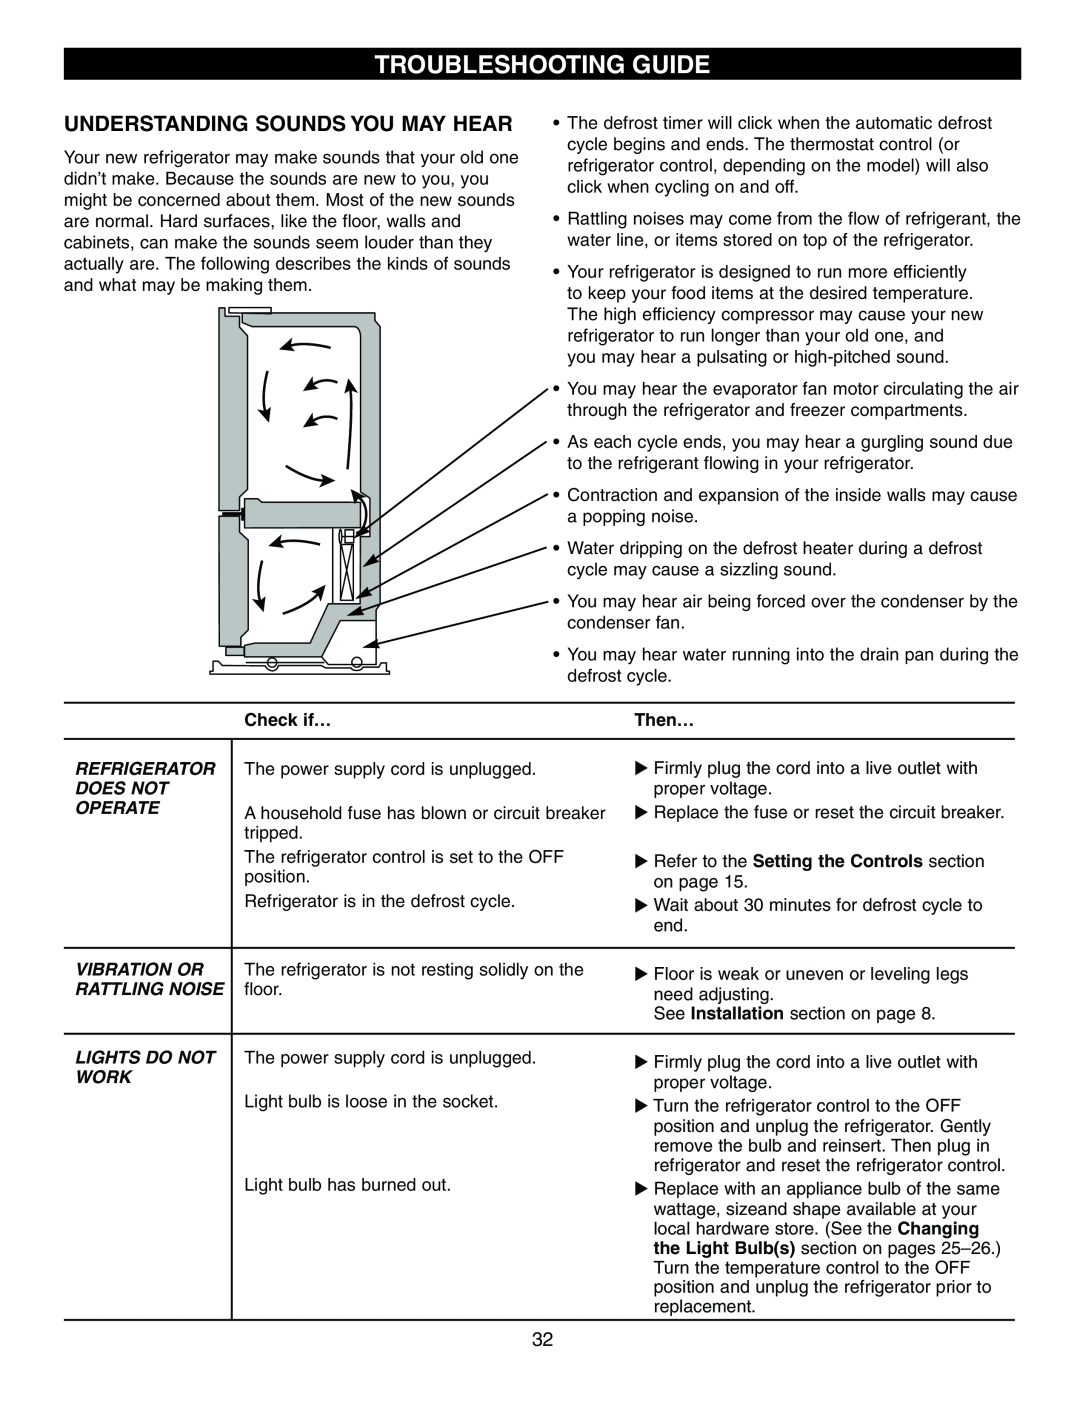 LG Electronics LRFD25850, LRFD21855 manual Troubleshooting Guide, Understanding Sounds You May Hear, Check if…, Then… 